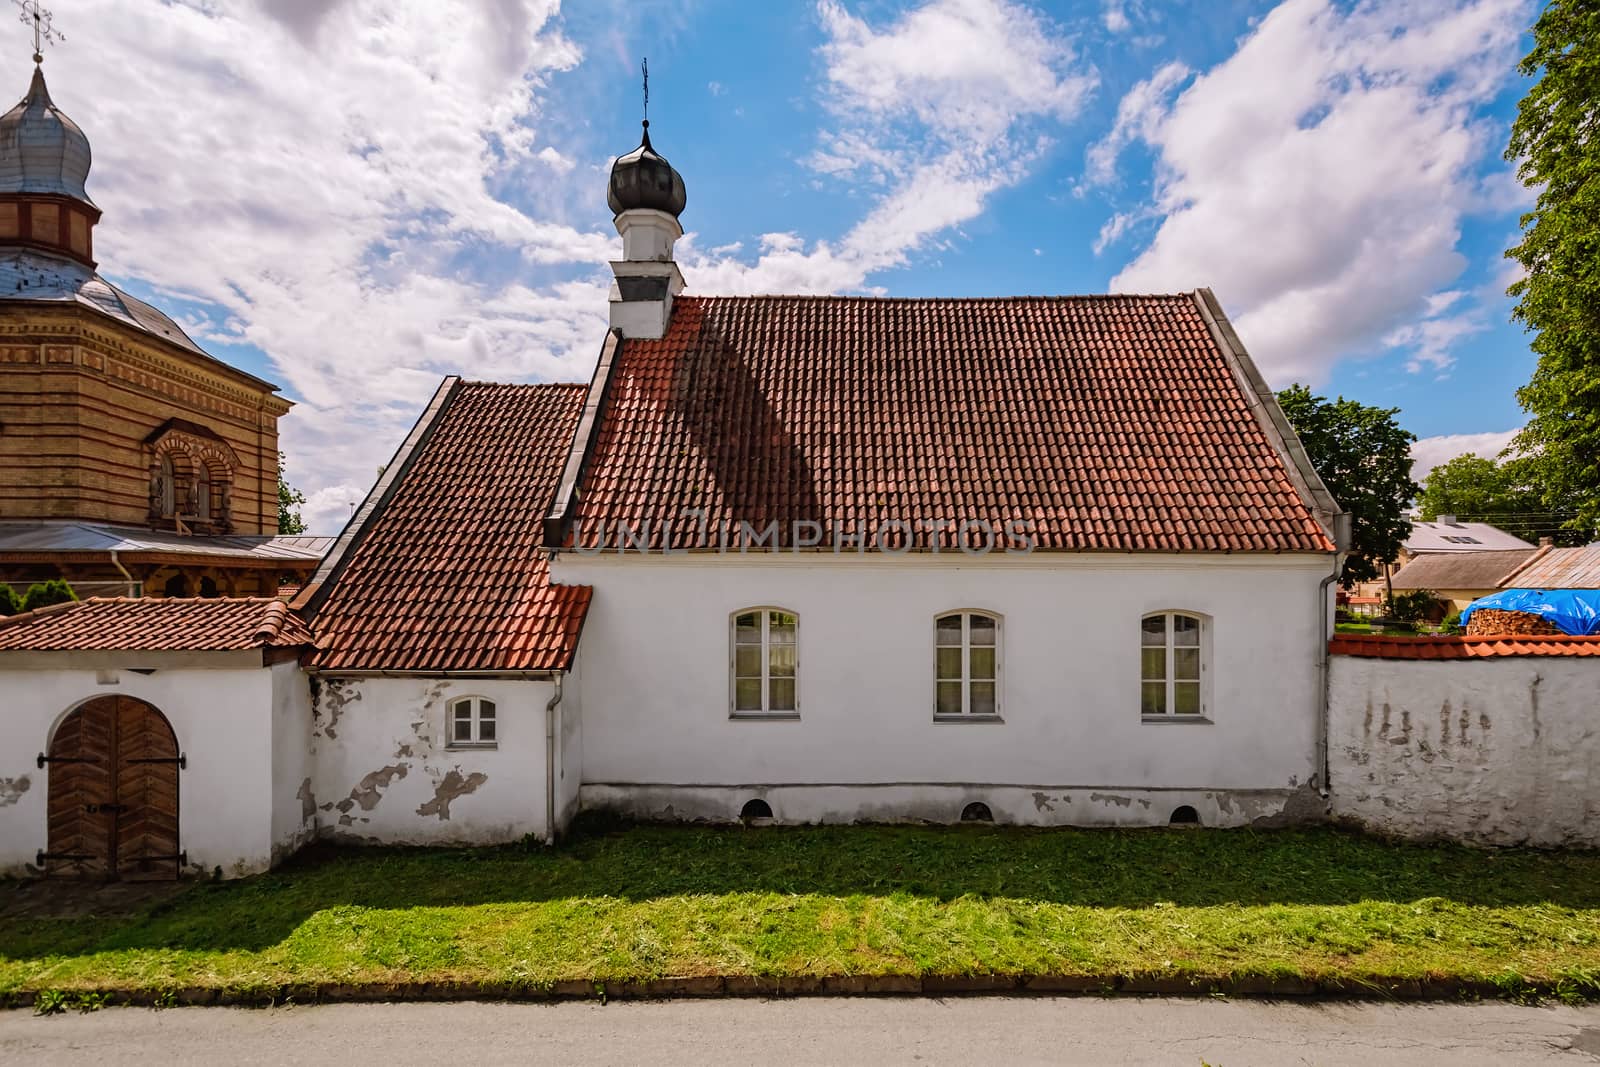 The Saint Nicholas The Miracle-worker’s church in The Holy Spirit Mens Monastery, Jekabpils, Latvia